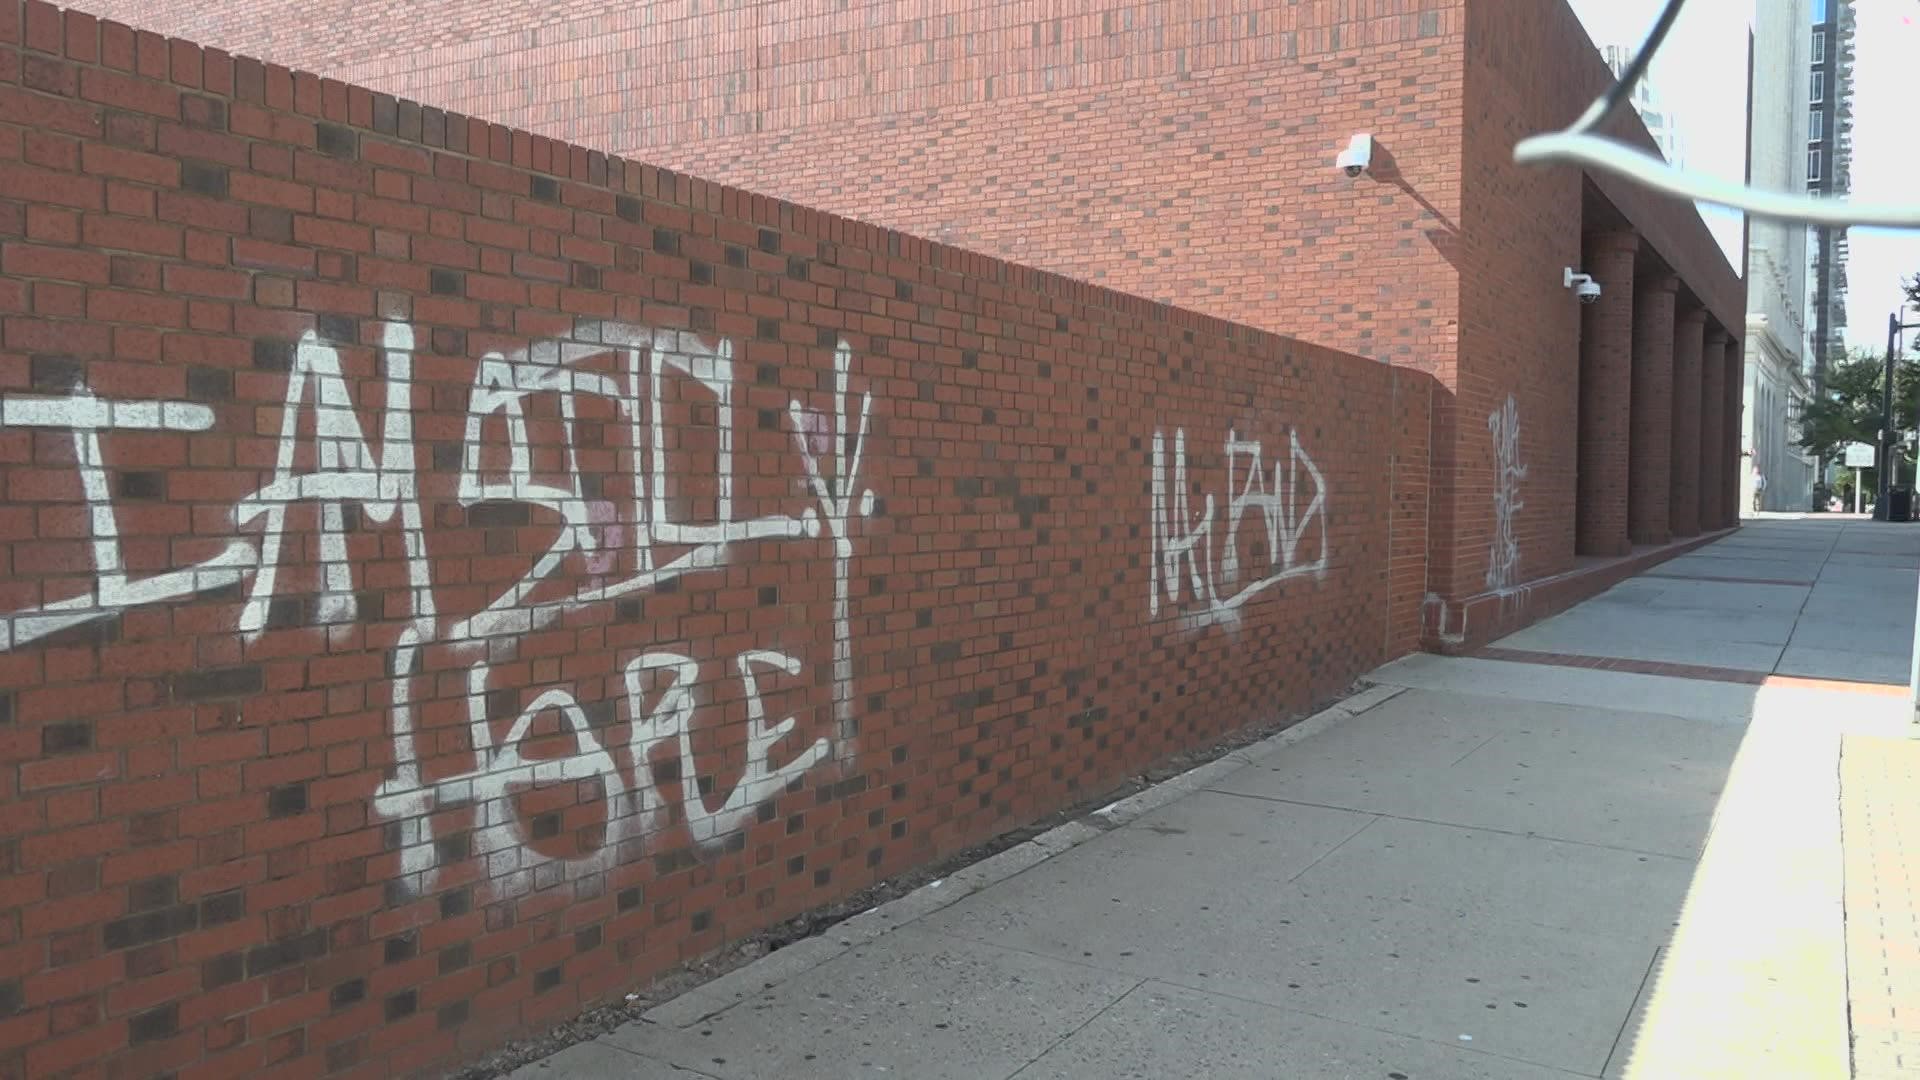 Investigators say nine buildings were vandalized with graffiti early Wednesday morning.